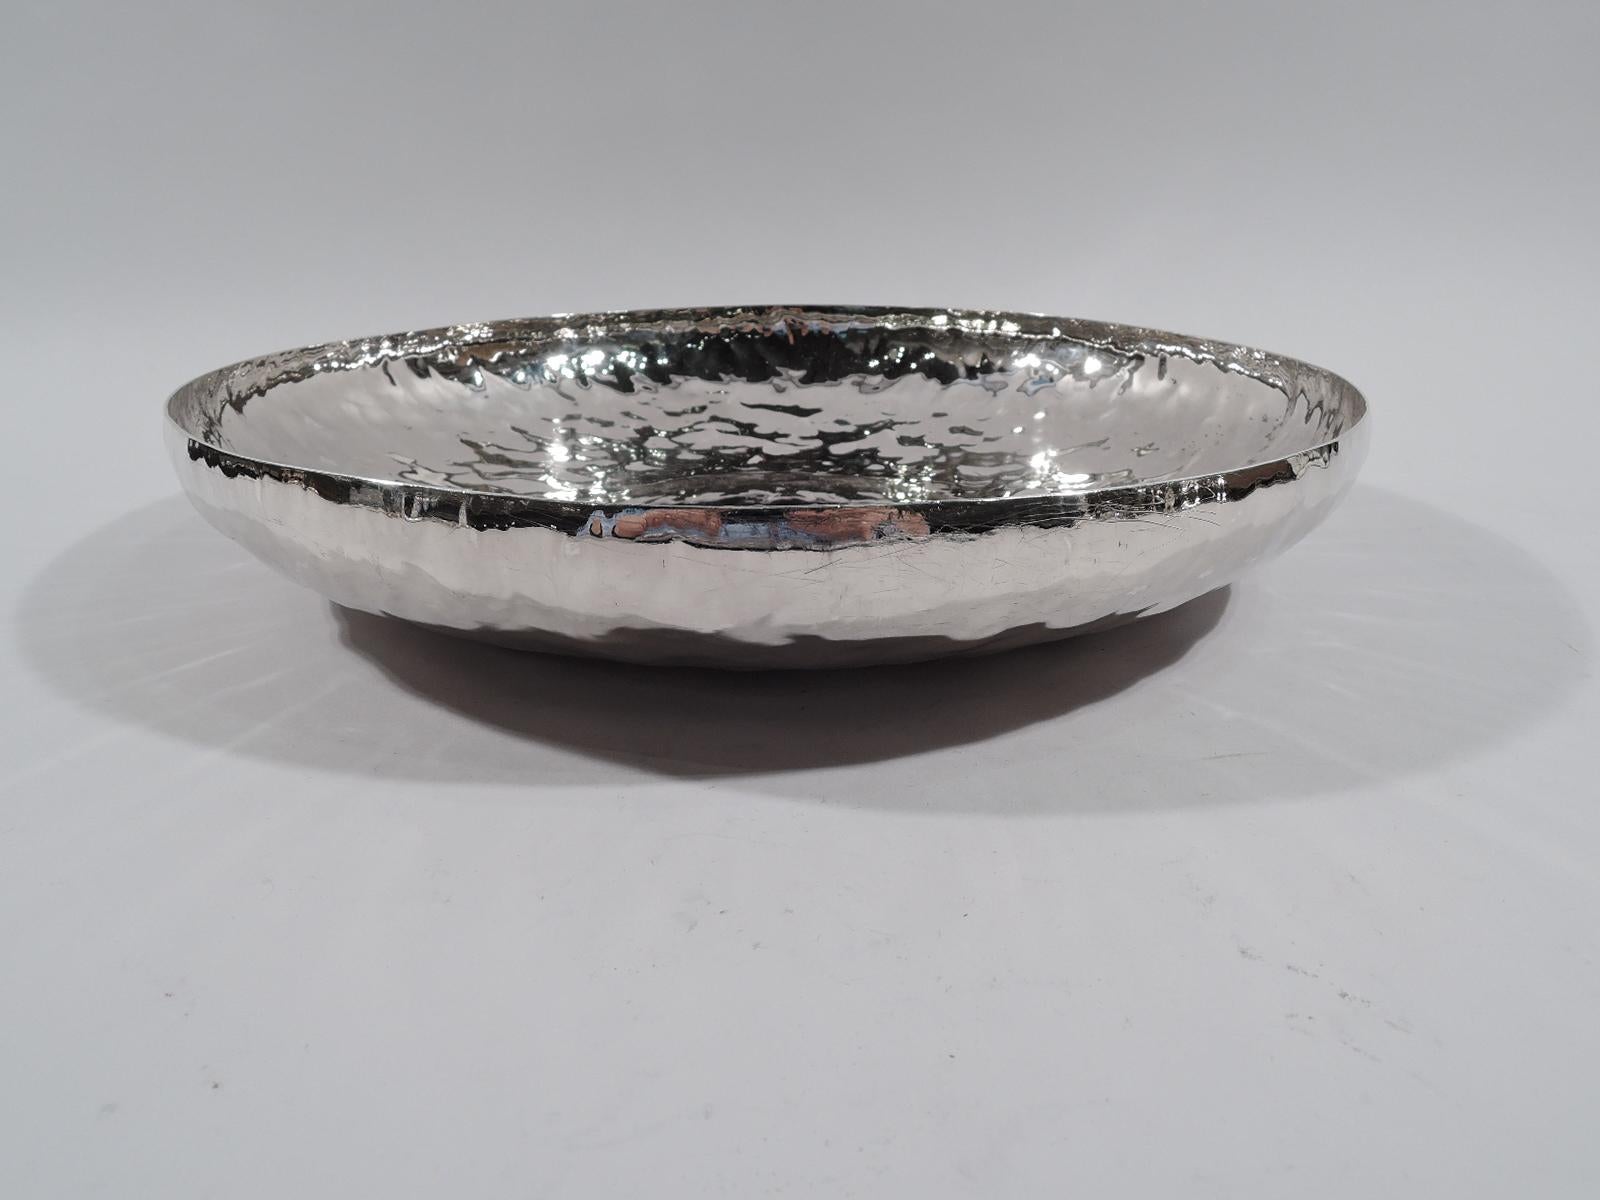 Craftsman sterling silver charger. Made by William Waldo Dodge, Jr in Asheville, North Carolina, ca 1930. Round with curved sides. Irregular hand-hammering. Center plain with applied monogram in wreath and engraved phrase: “Ontario Shoot / 1930 /